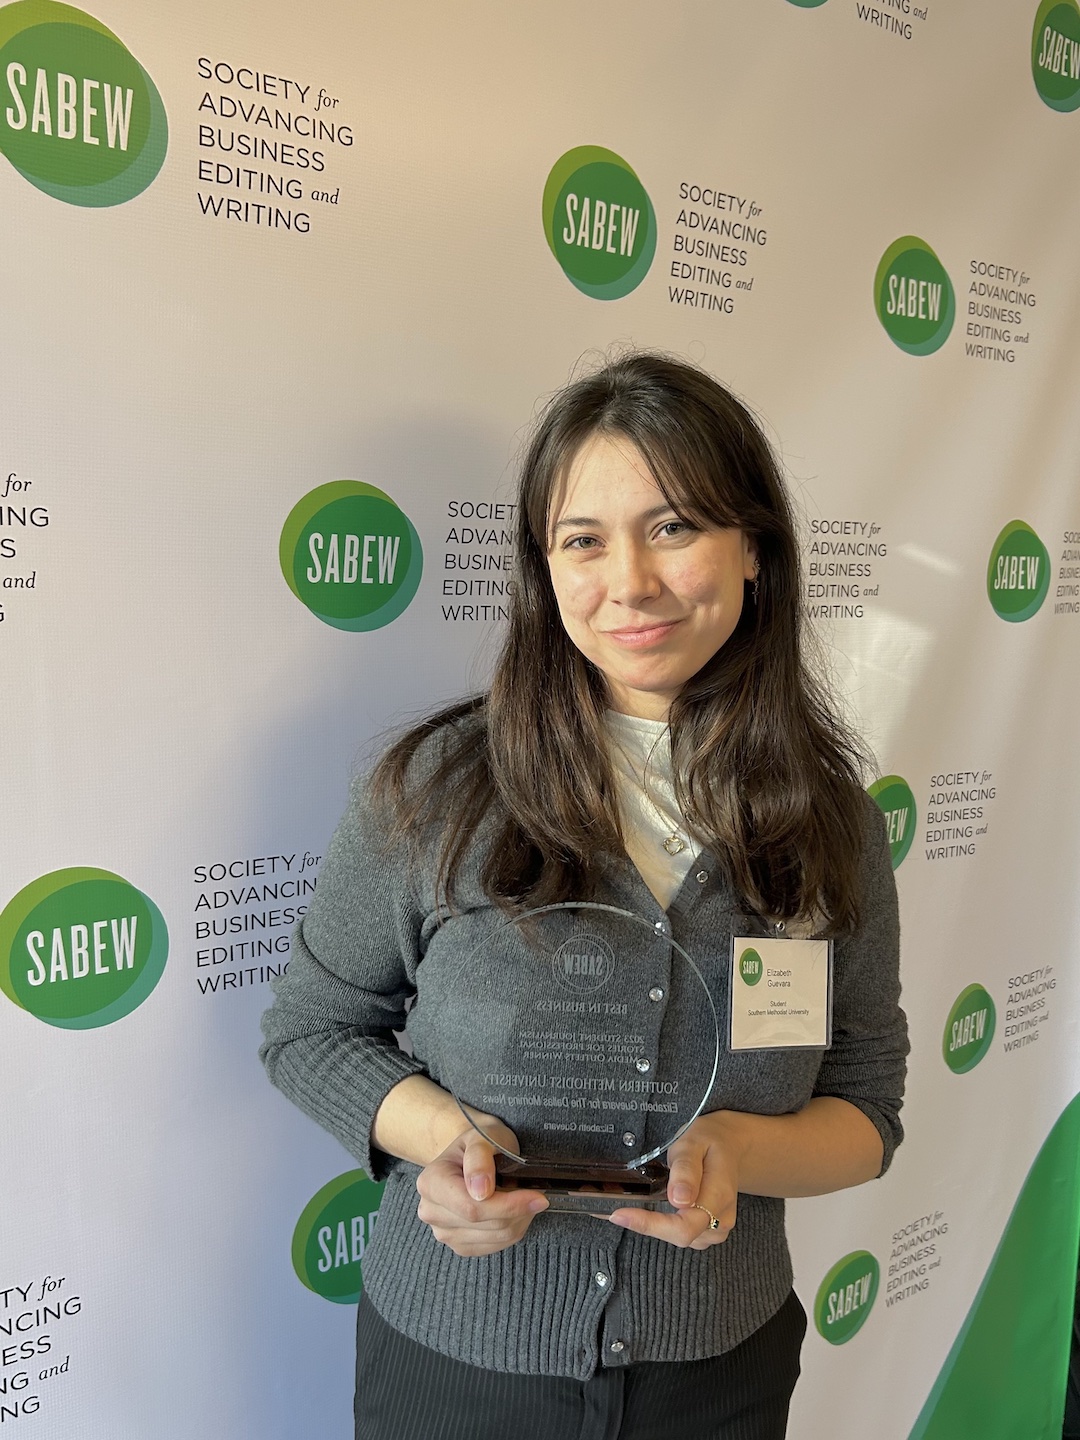 Senior Elizabeth Guevara poses with her award for student business reporting at the Society for Advancing Business Editing and Writing conference.